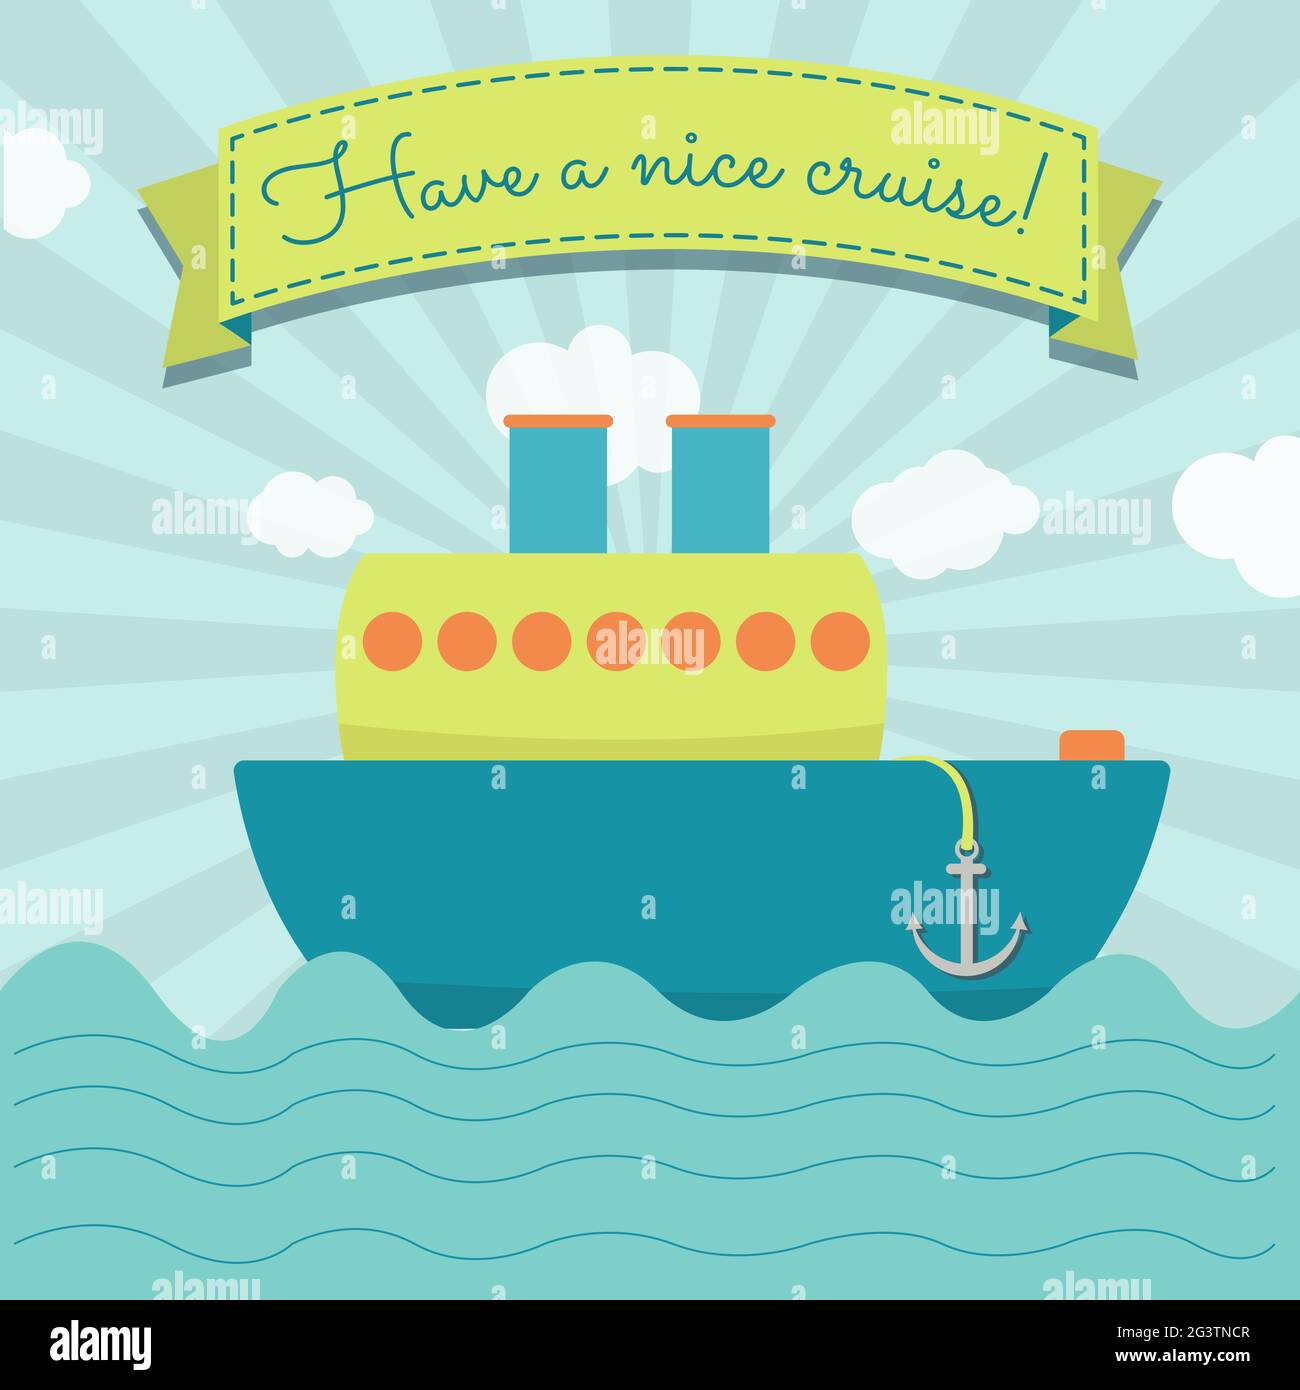 A cruise ship and a ribbon with the text 'Have a nice cruise' Stock Vector